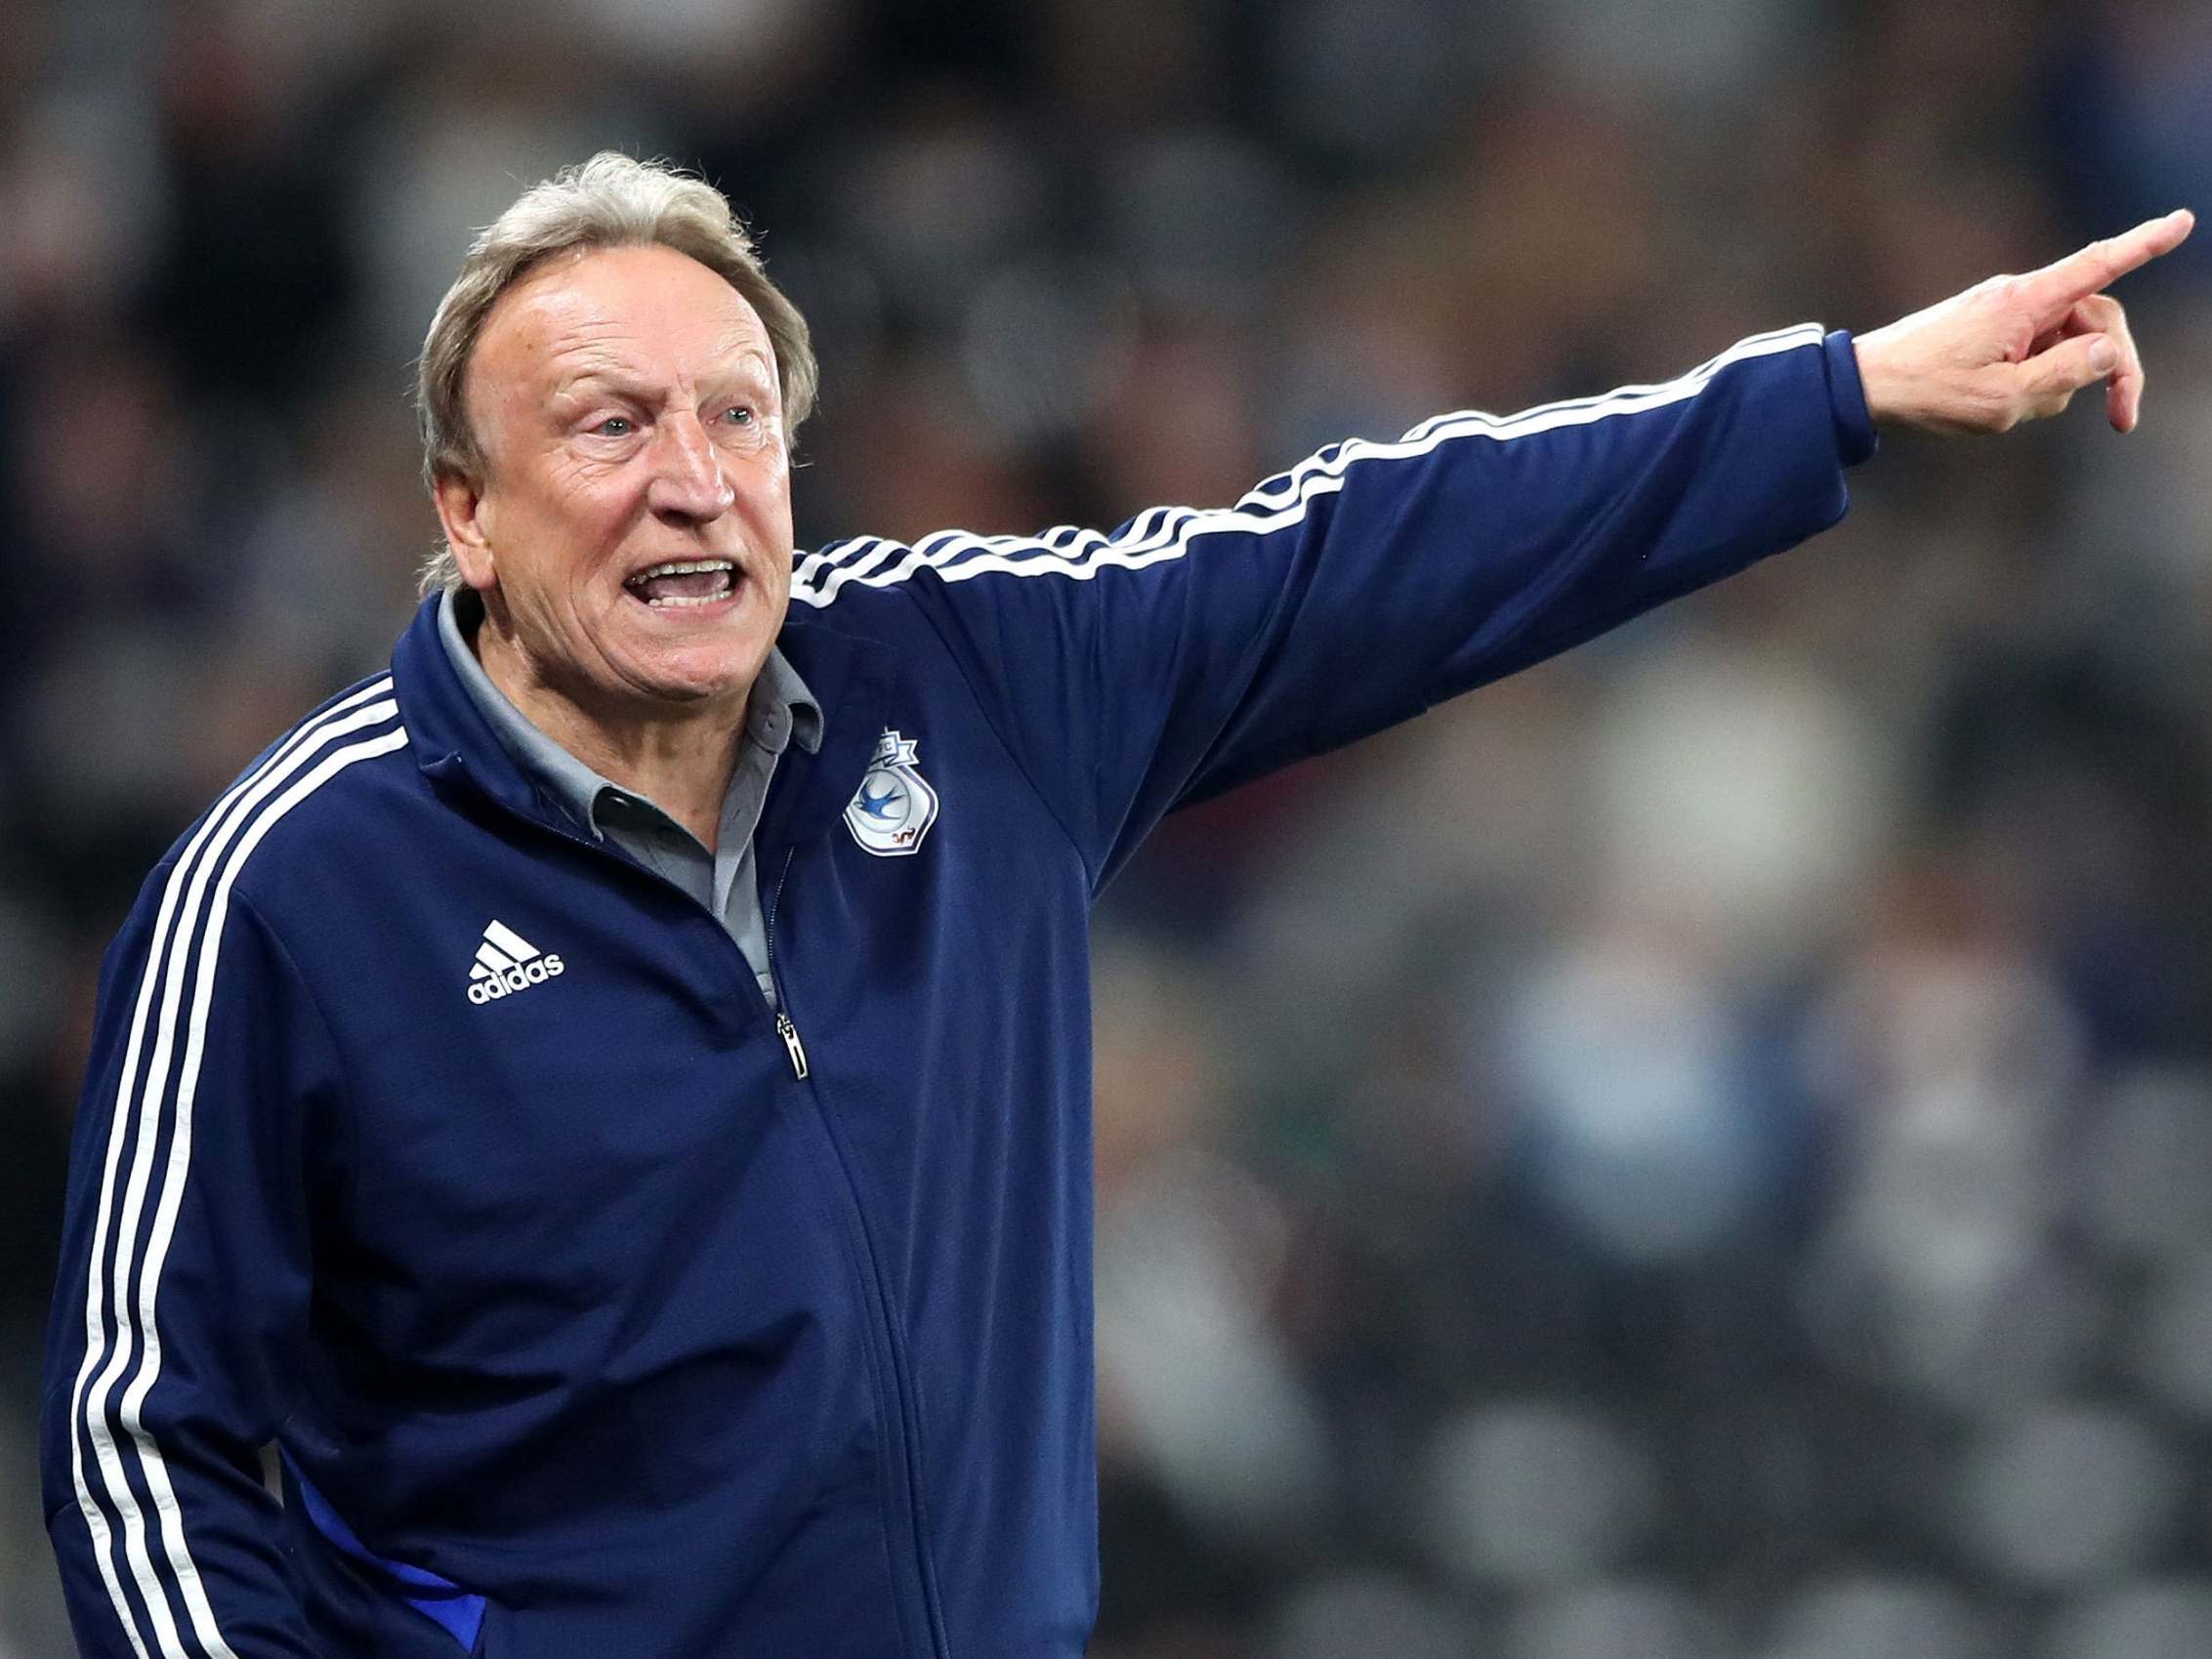 Neil Warnock returns to management seven months after leaving Cardiff City